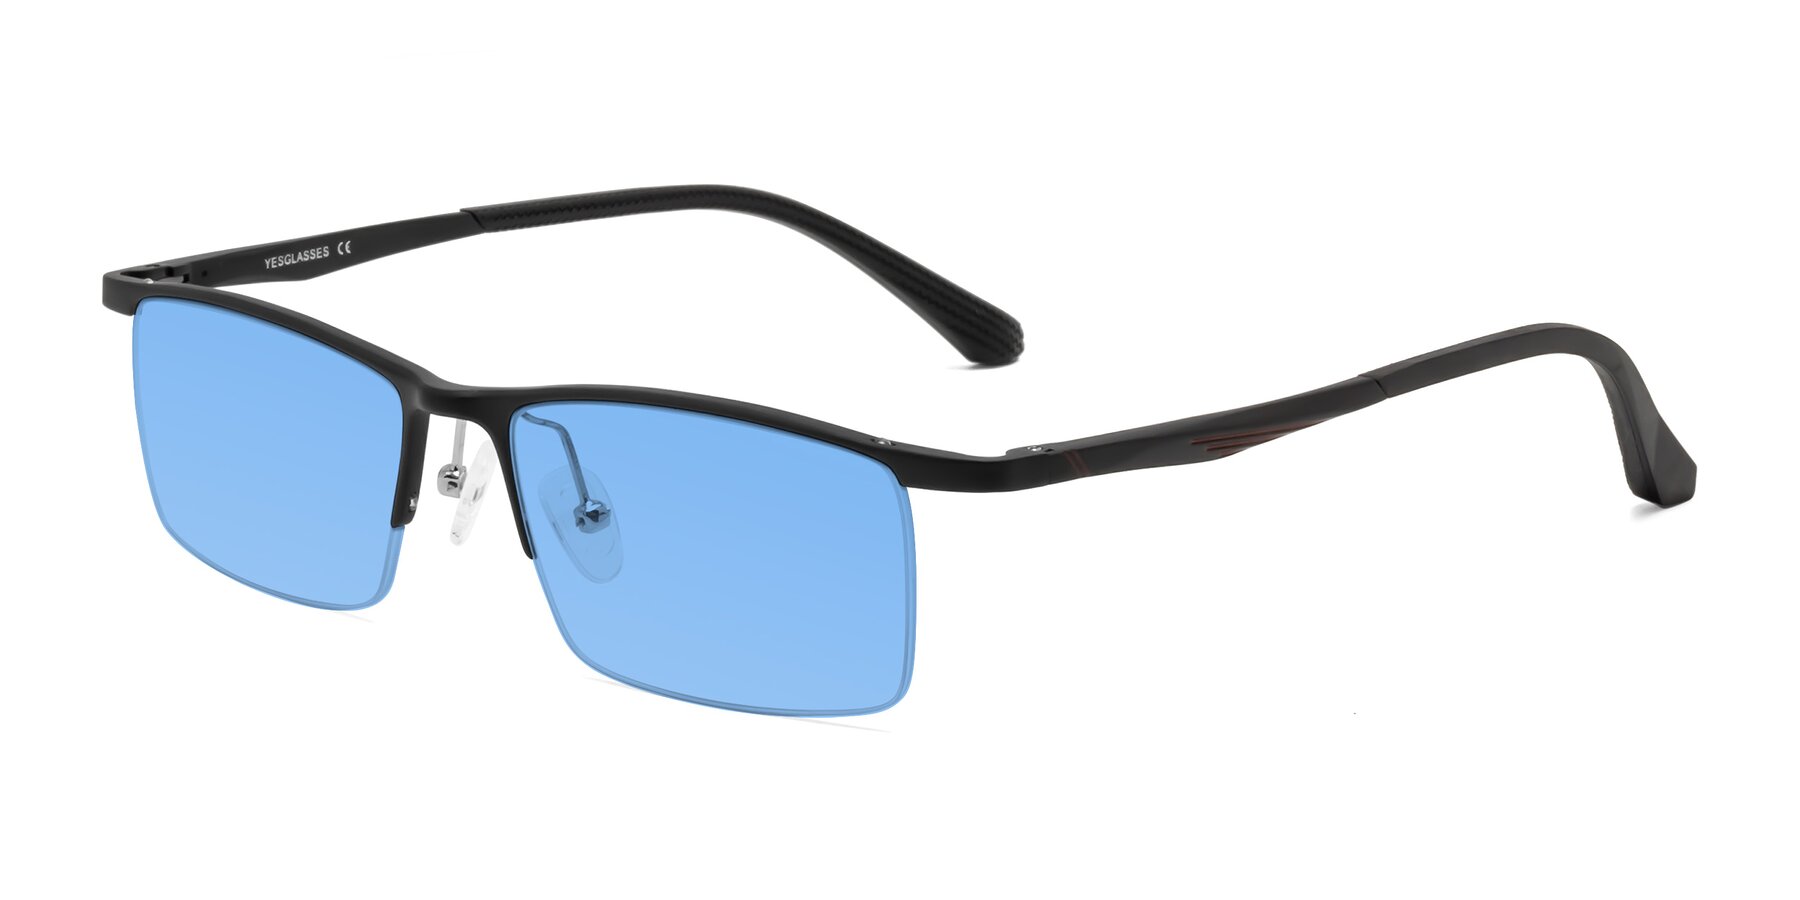 Angle of CX6236 in Black with Medium Blue Tinted Lenses